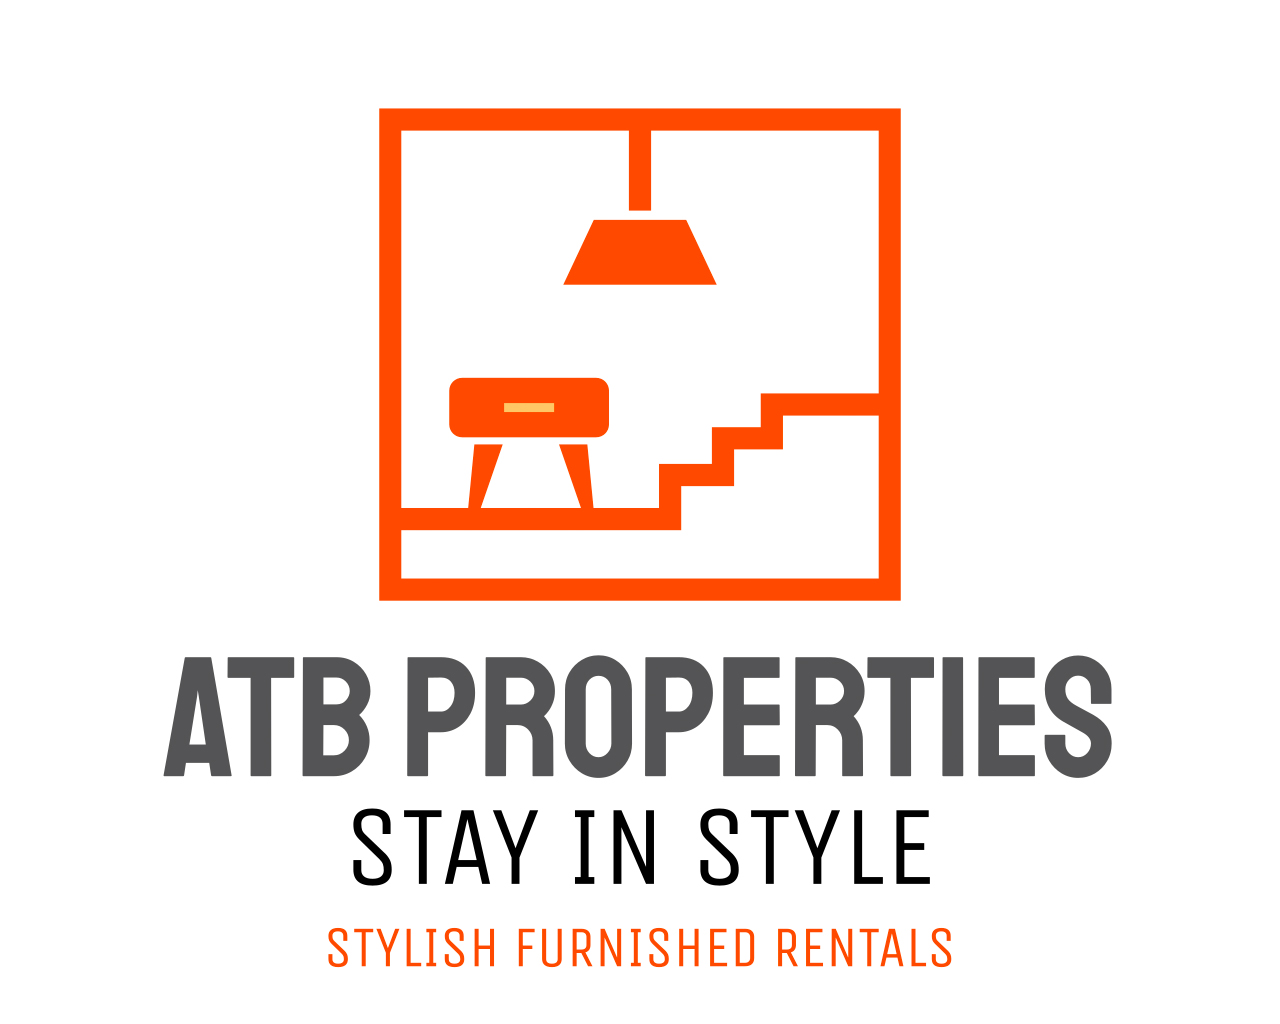 ATB Properties Stay in Style Rentals